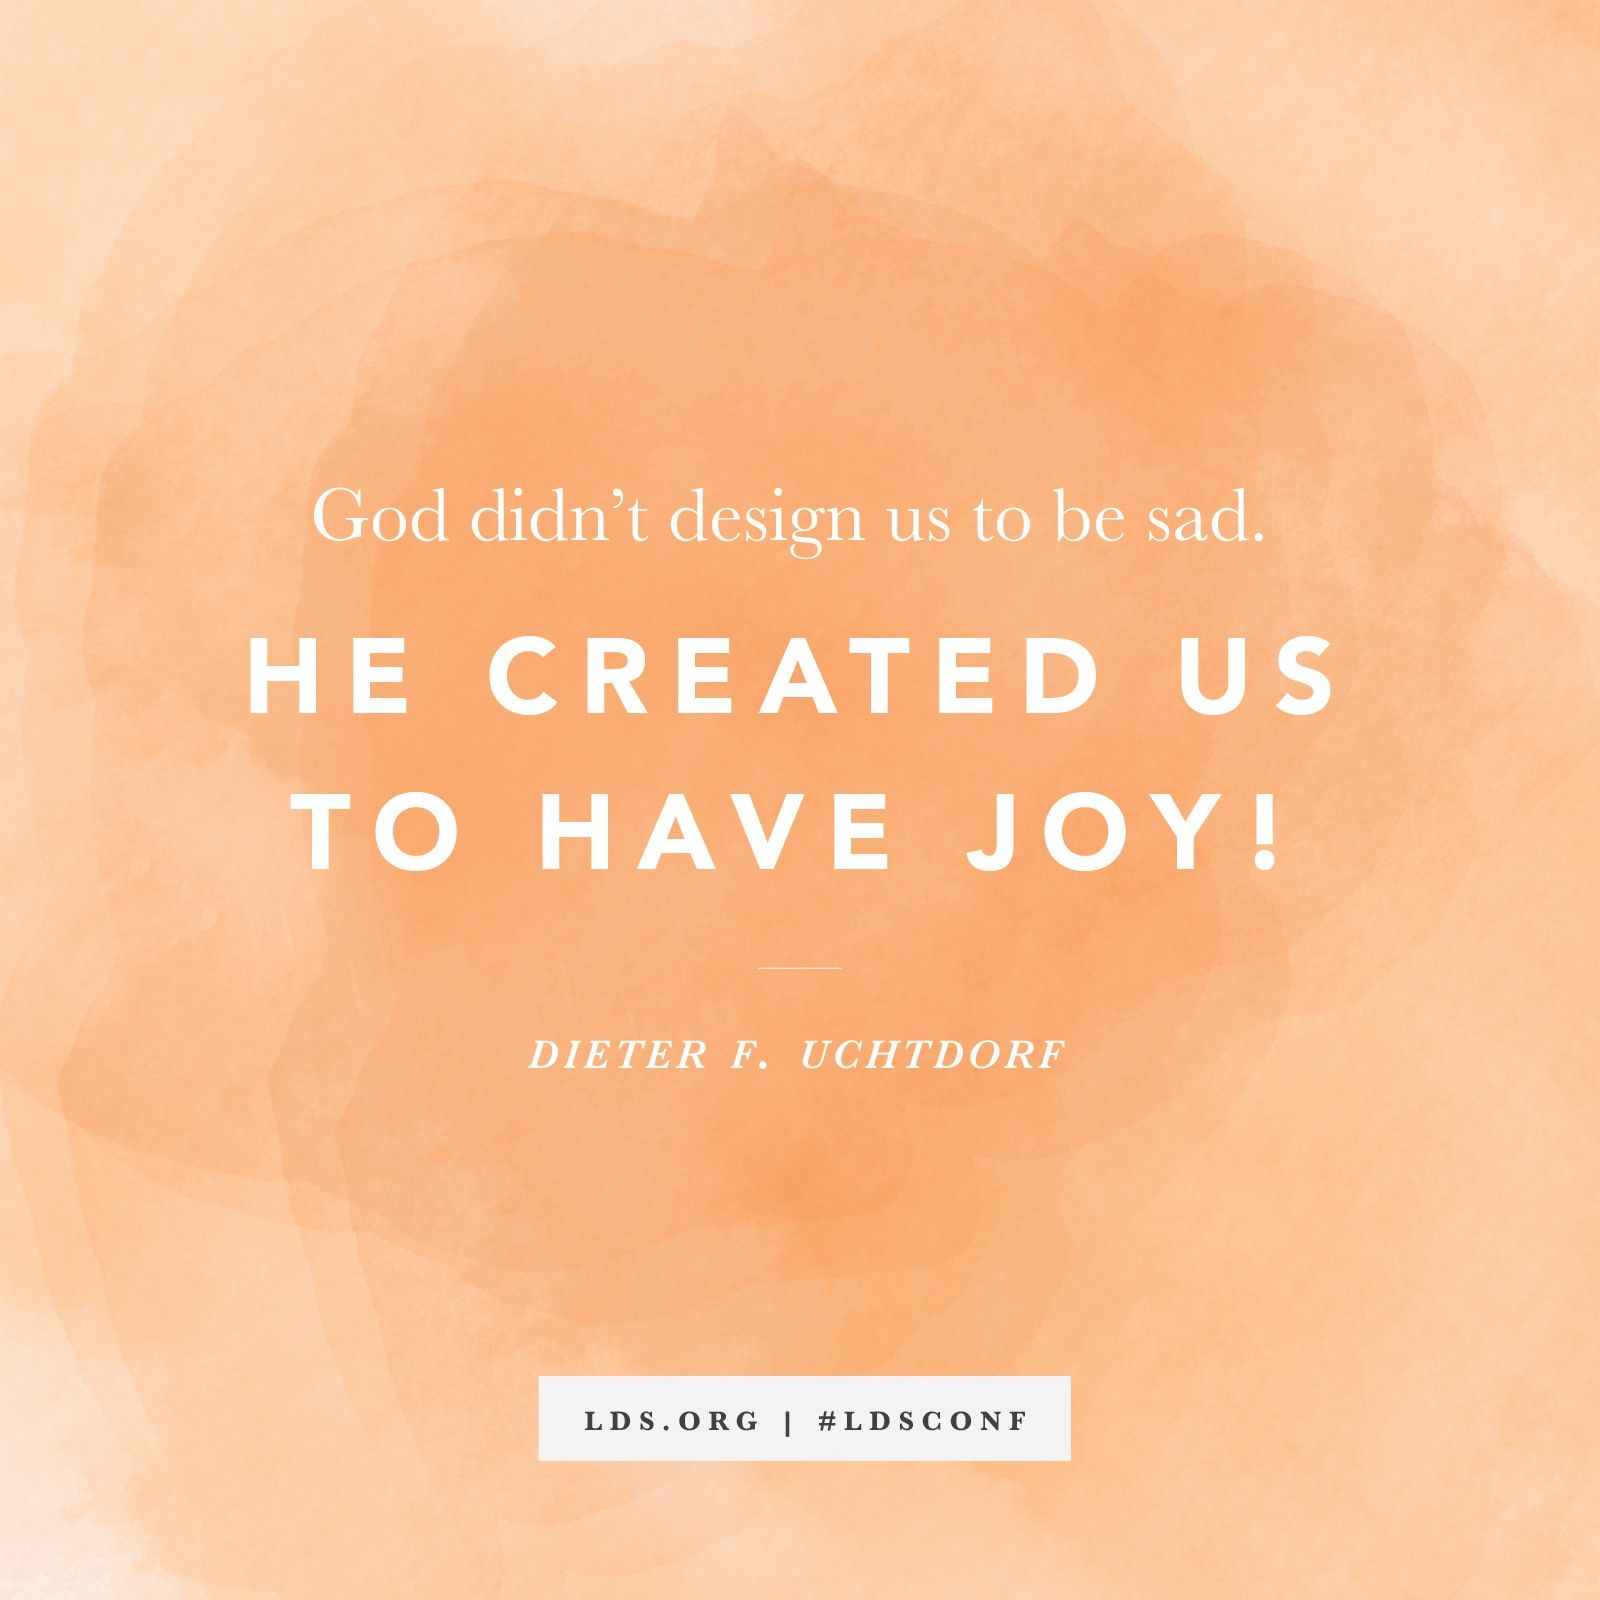 “God didn’t design us to be sad. He created us to have joy!” —President Dieter F. Uchtdorf, “A Summer with Great-Aunt Rose”